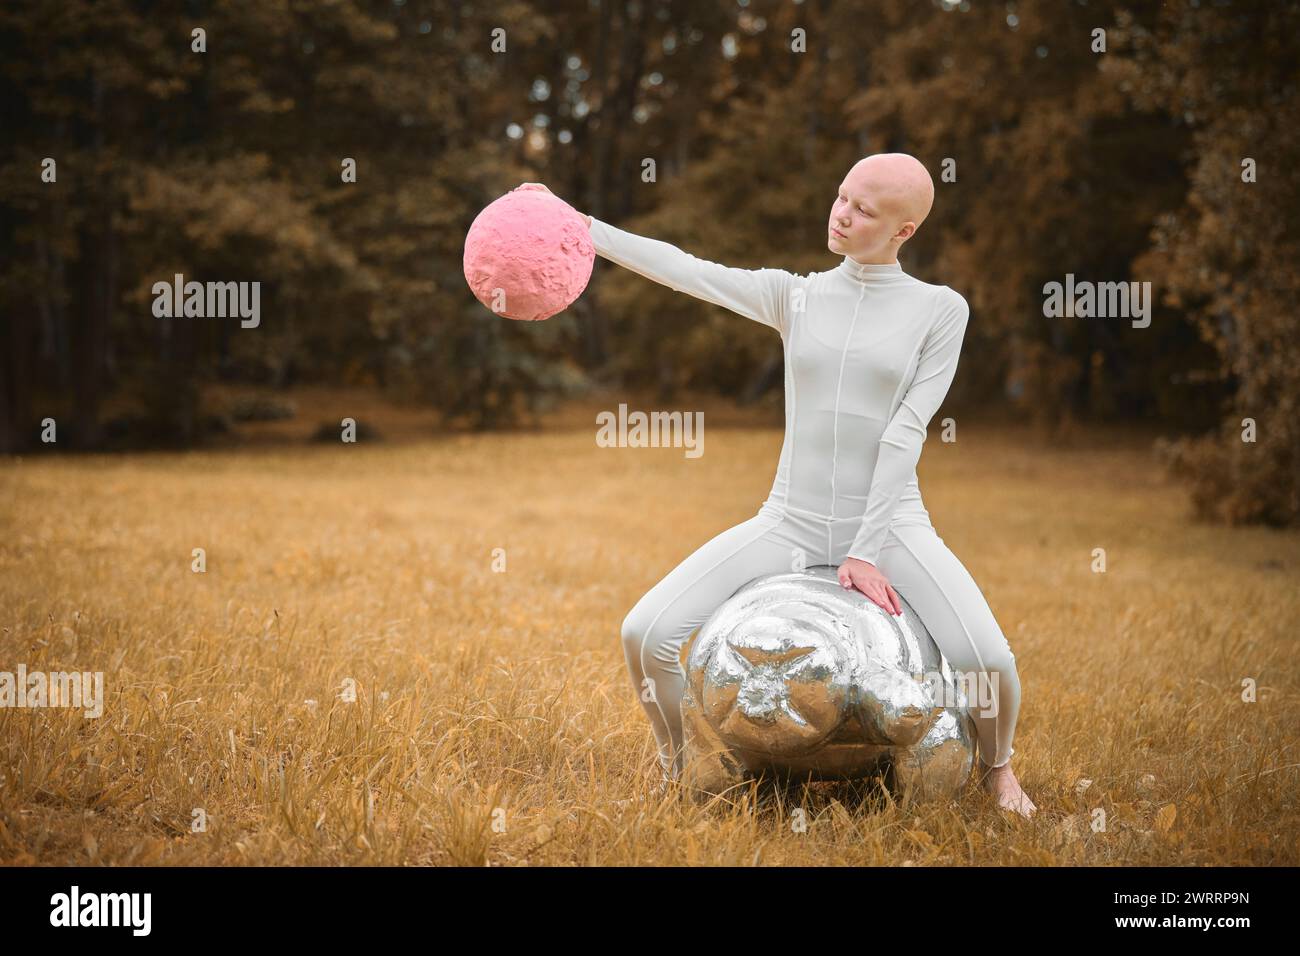 Young hairless girl with alopecia in white cloth sits on tardigrade figure and holds pink ball in hand on fall lawn park, surreal scene with bald teen Stock Photo